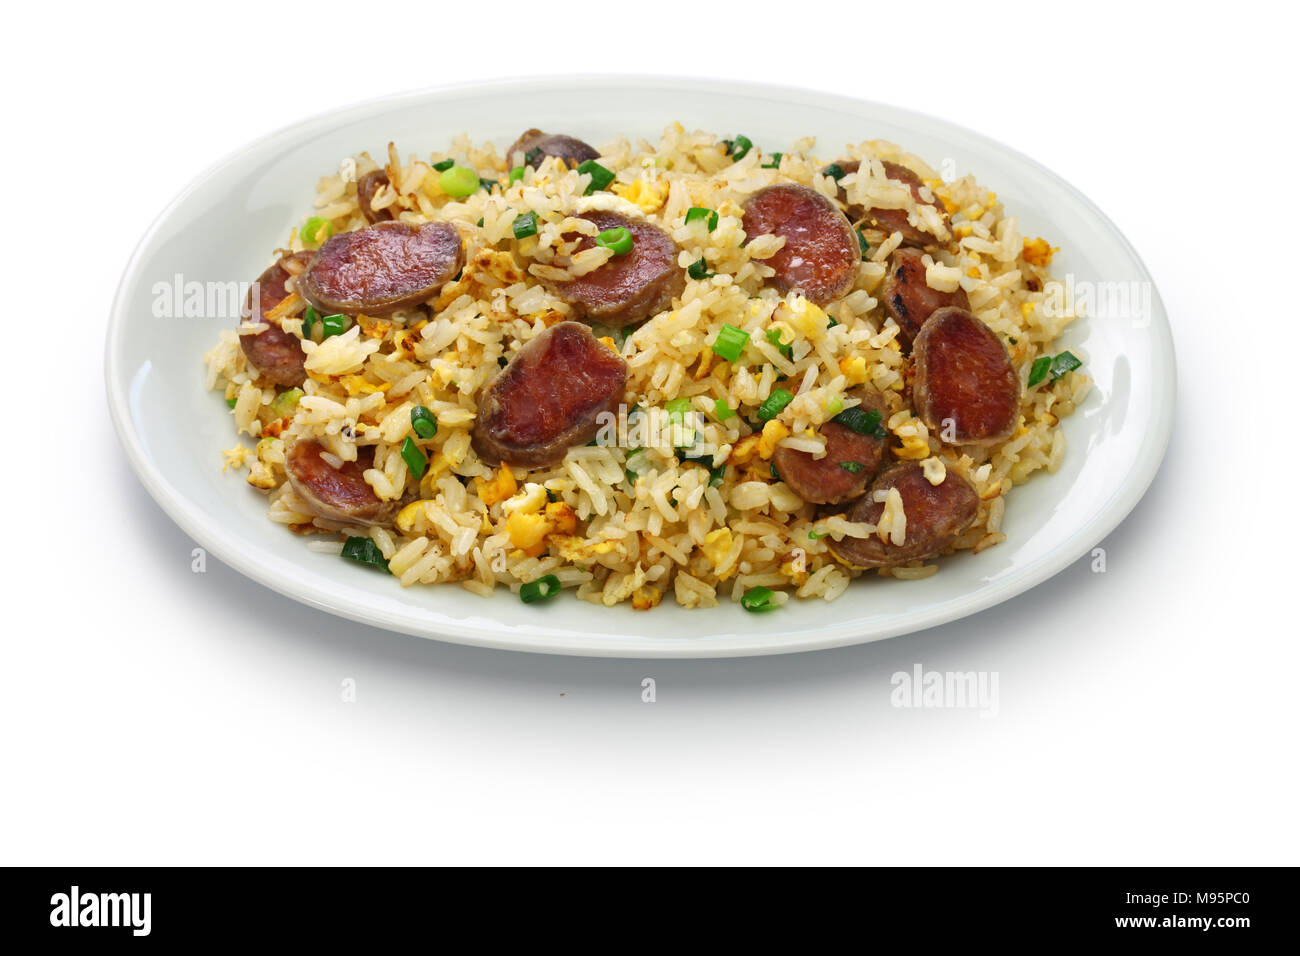 chinese sausage fried rice, xiang chang chao fan isolated on white background Stock Photo